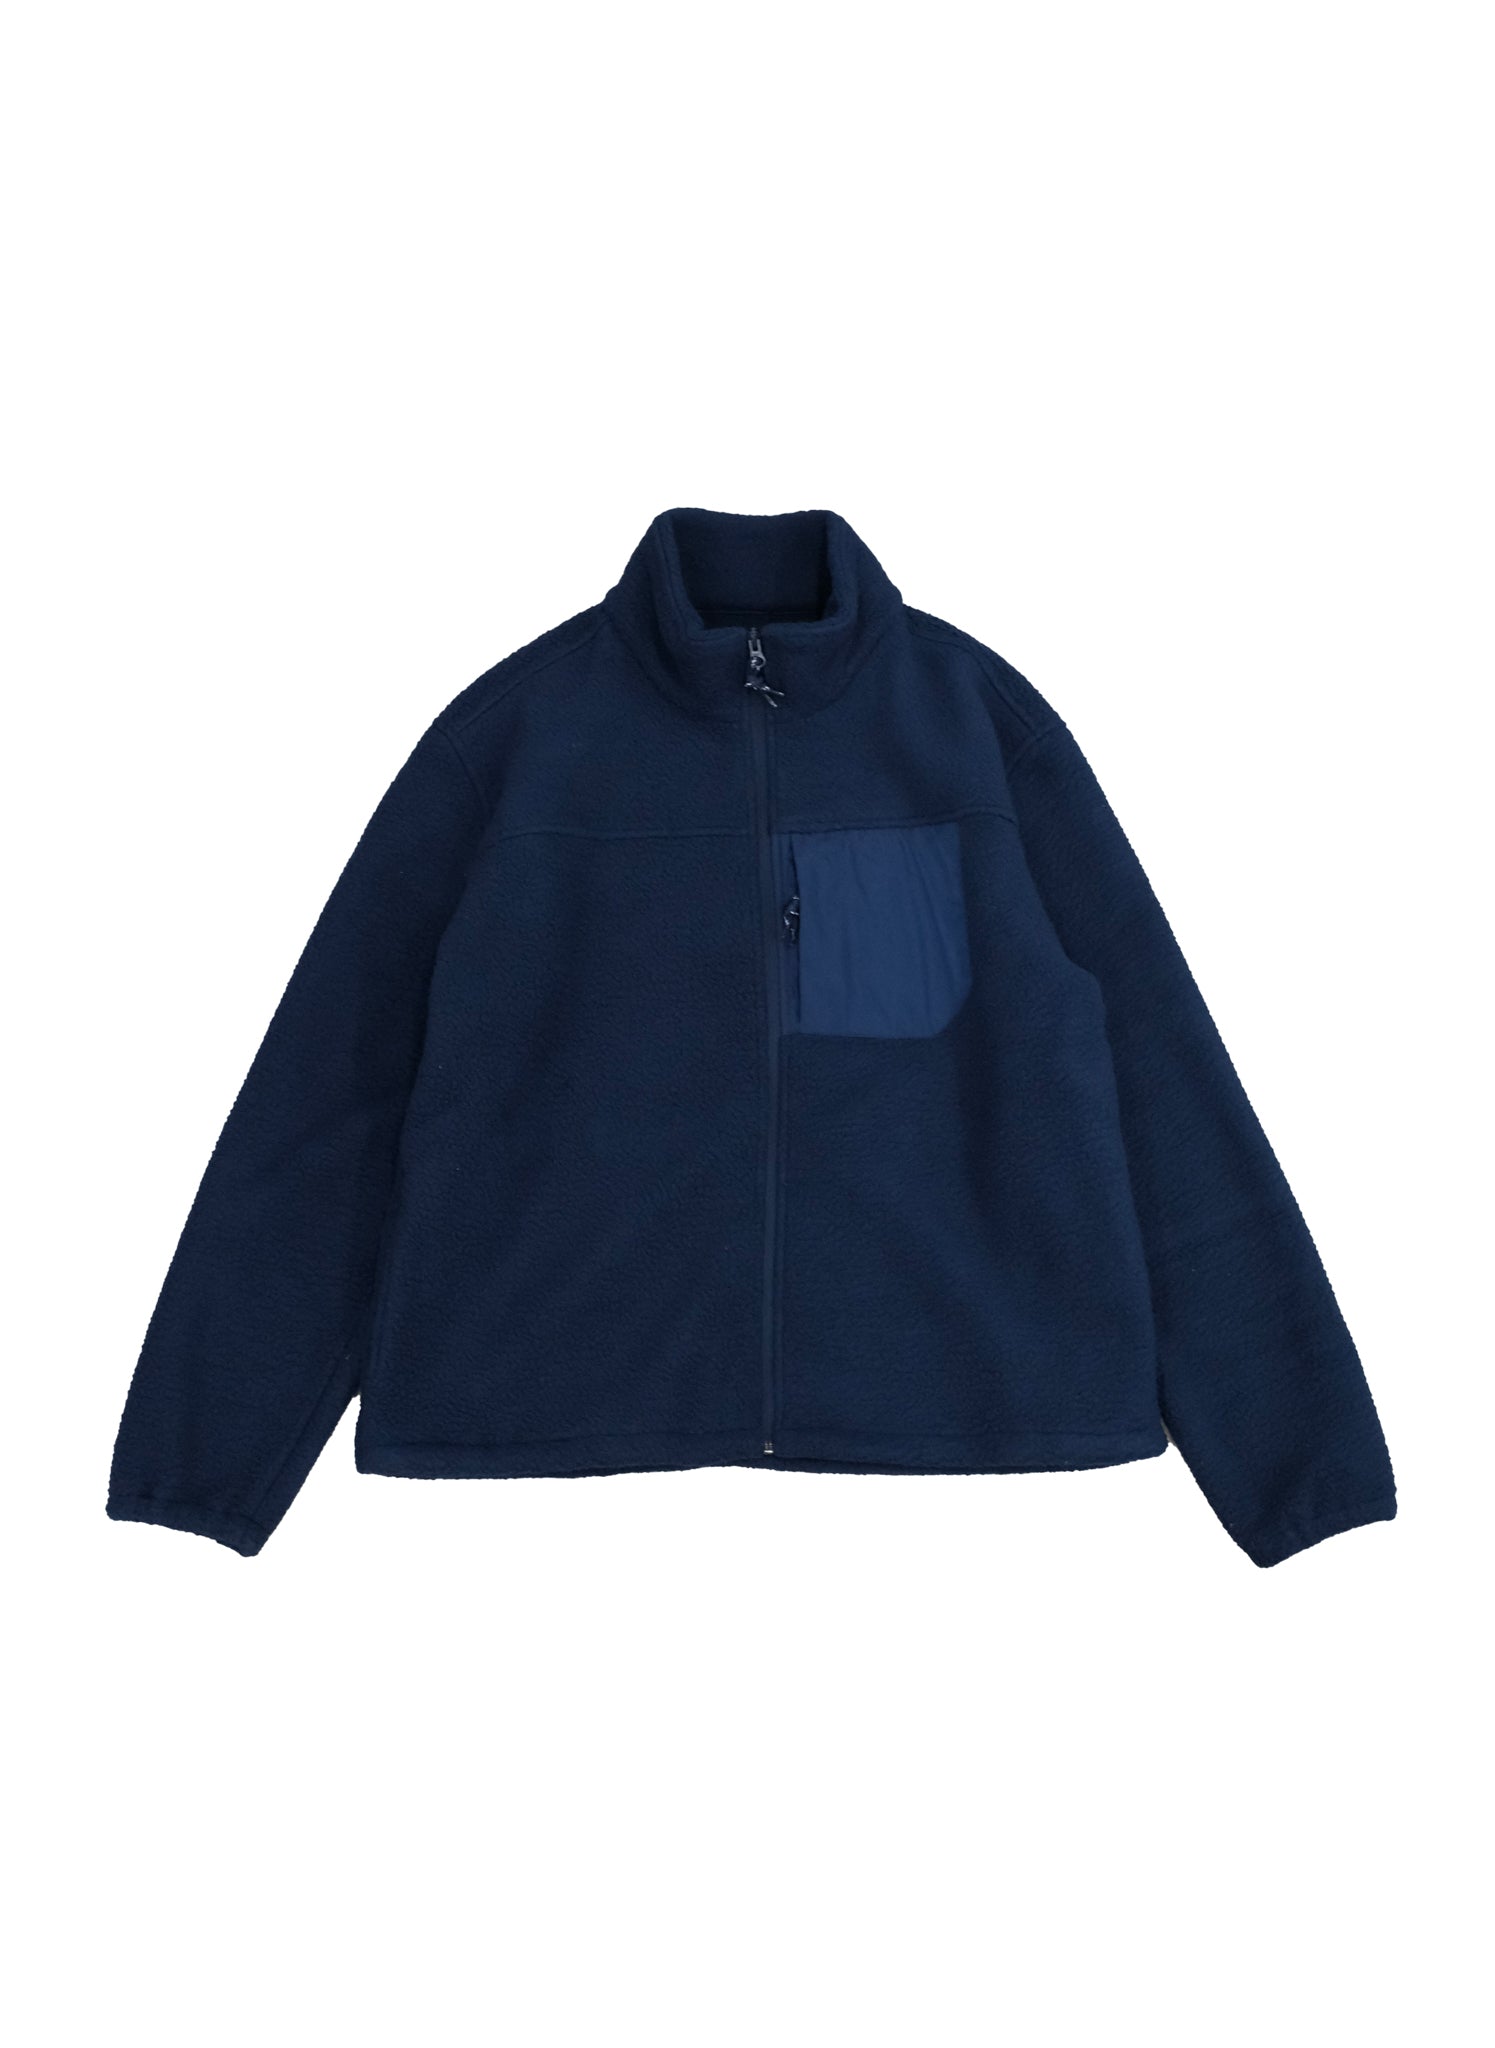 CCTB / FROM NORTHERN COUNTRY FLEECE JACKET NAVY